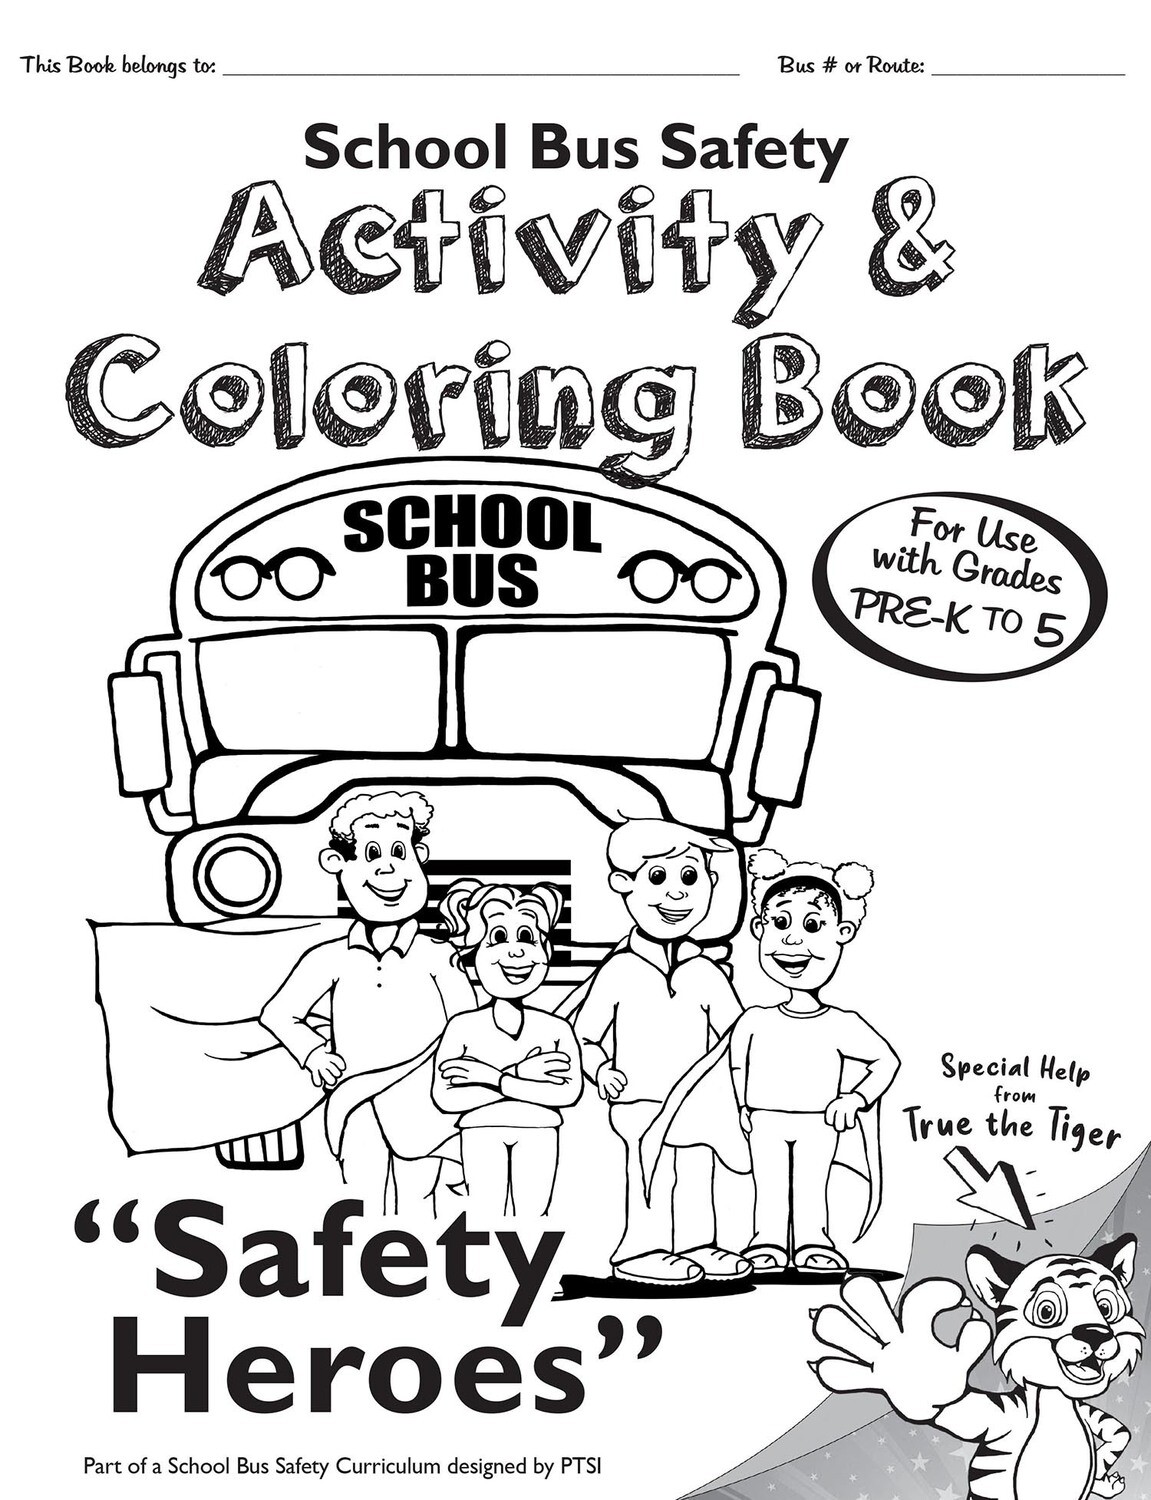 Activity & Coloring Book